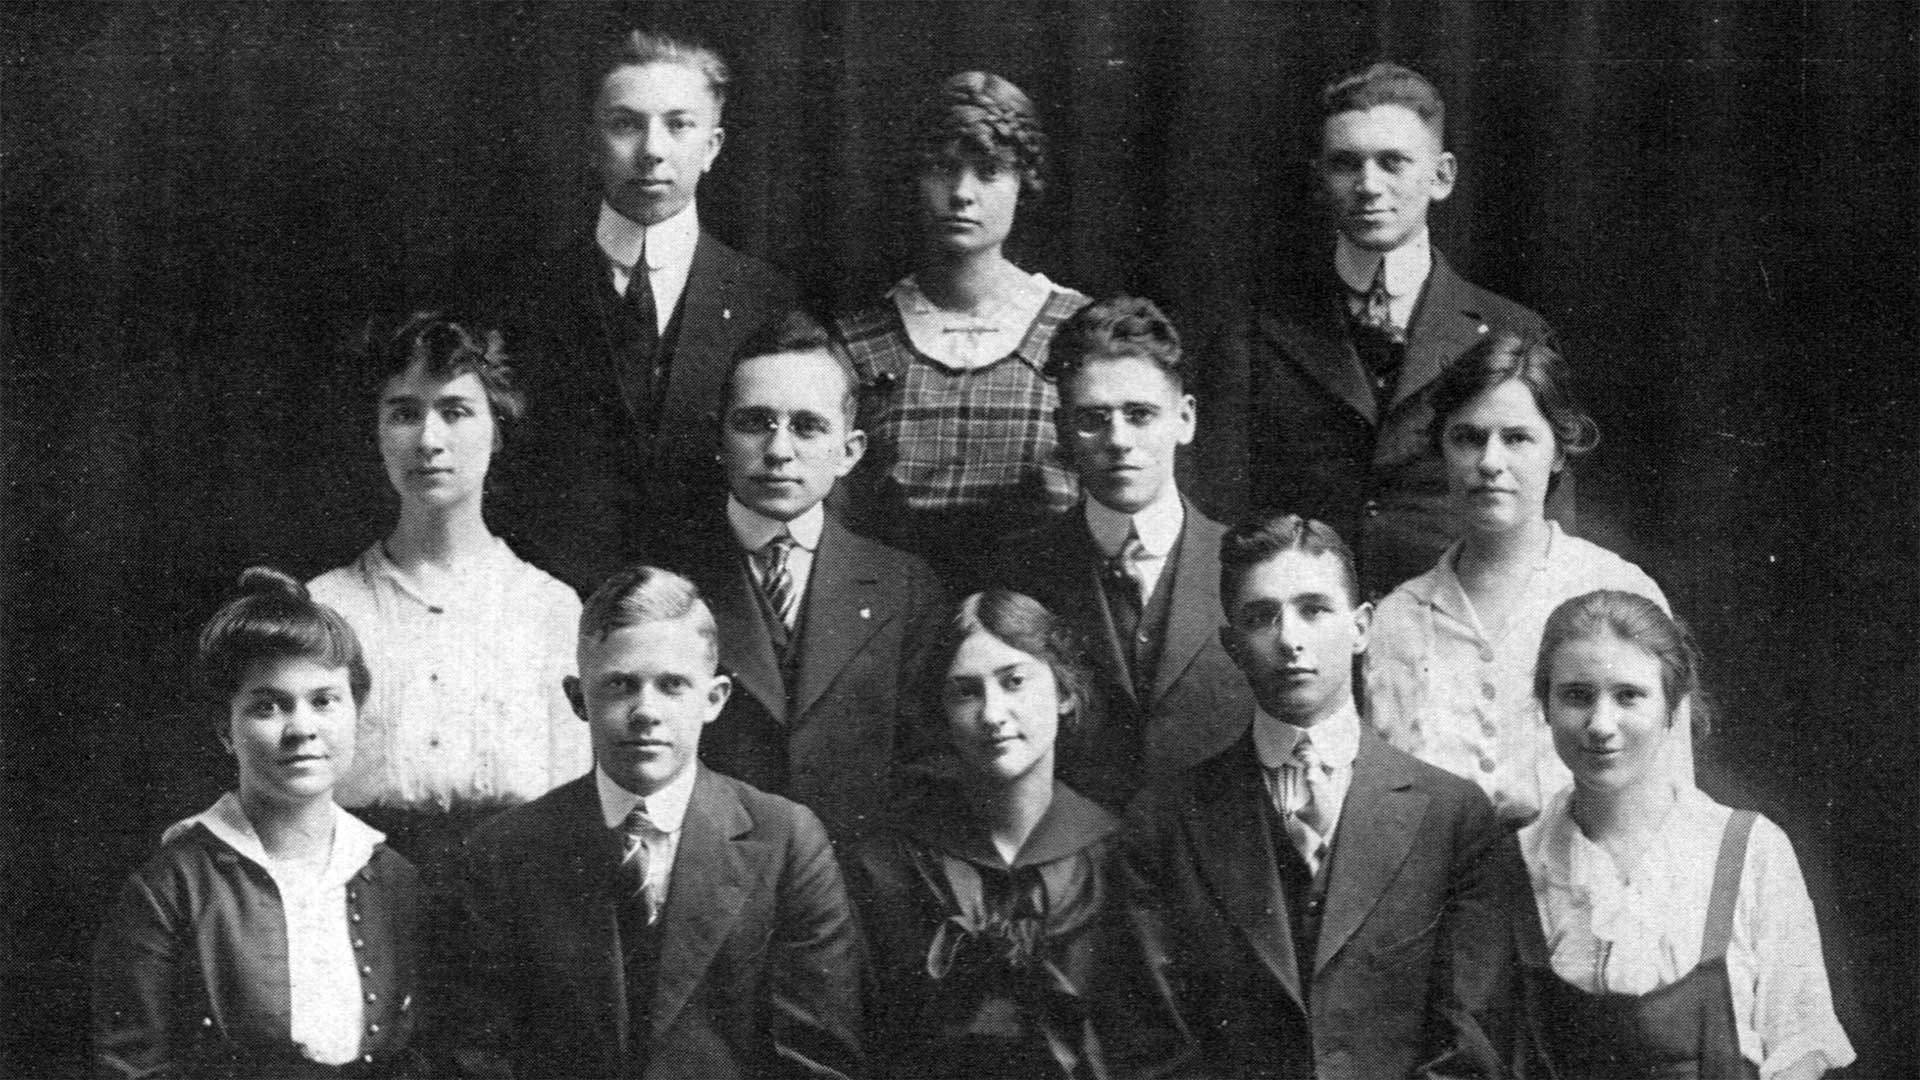 Early 20th century yearbook photo. 12 men and women in formal dress pose in a portrait style.